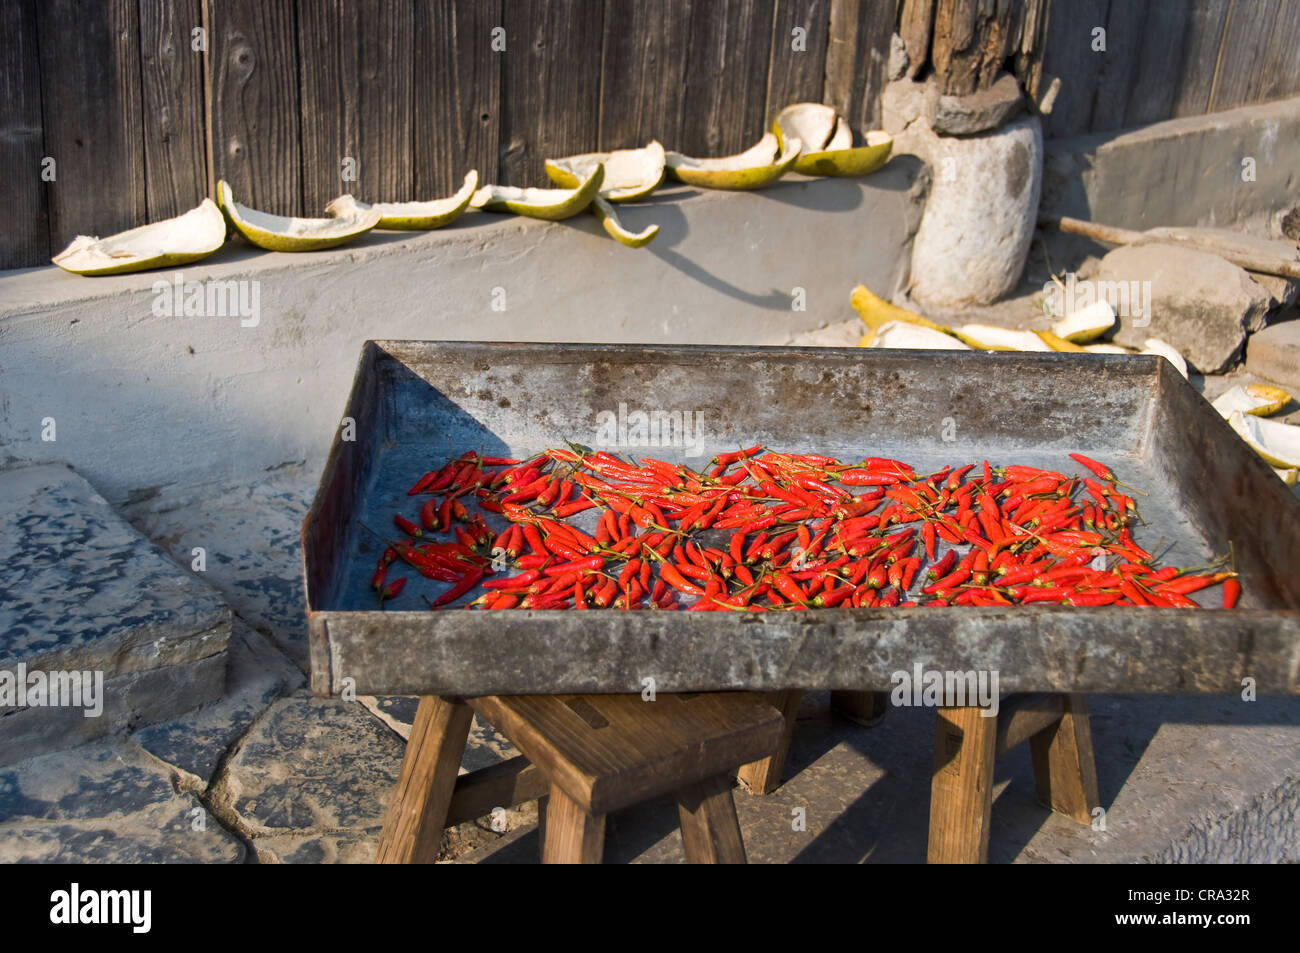 Red chilies drying in the sun - Dazhai village, Shanxi province, China Stock Photo